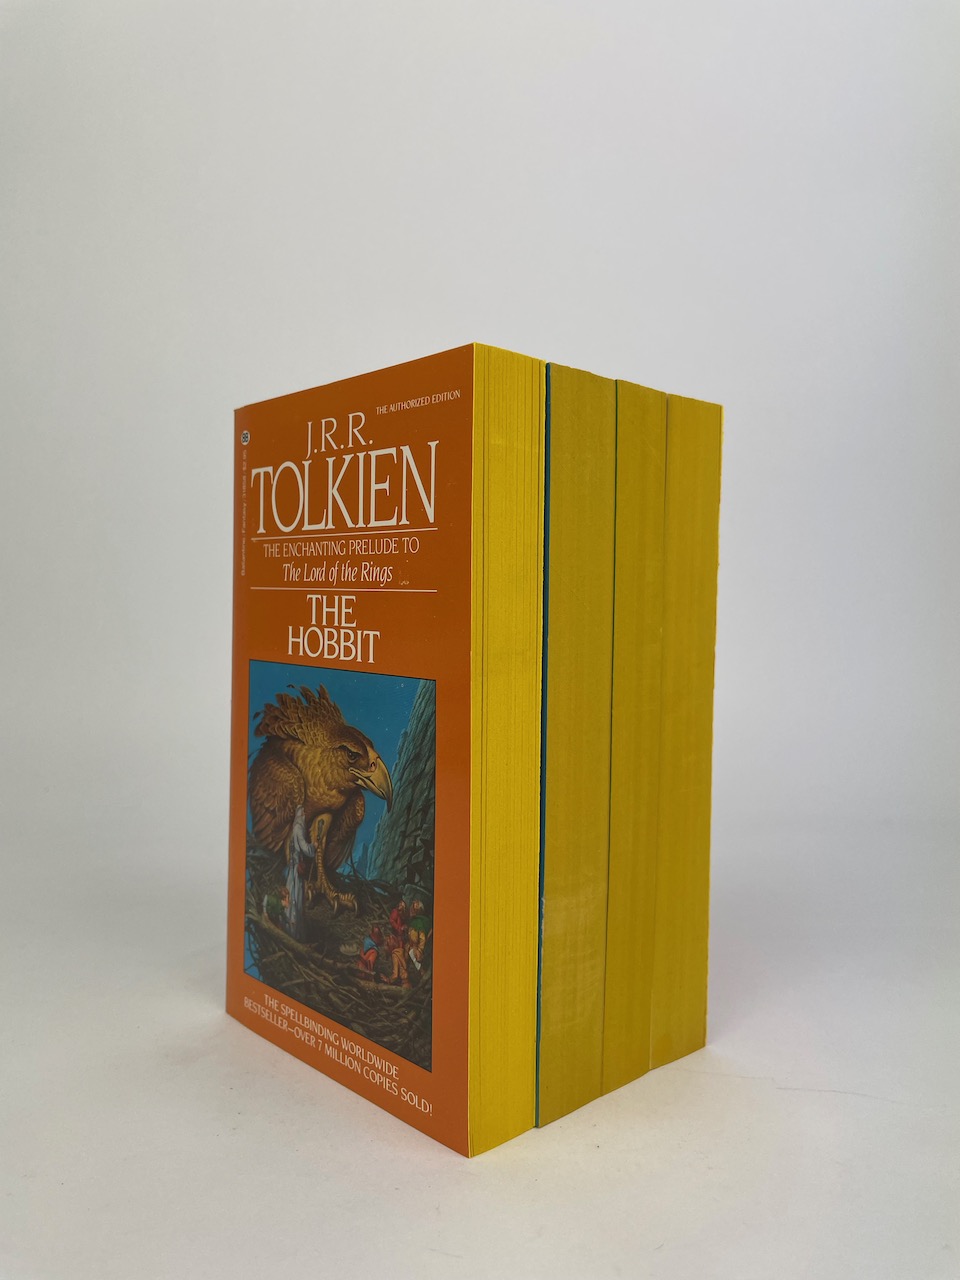 The Lord of the Rings and The Hobbit set from 1984, by Ballantine Books, New York 10